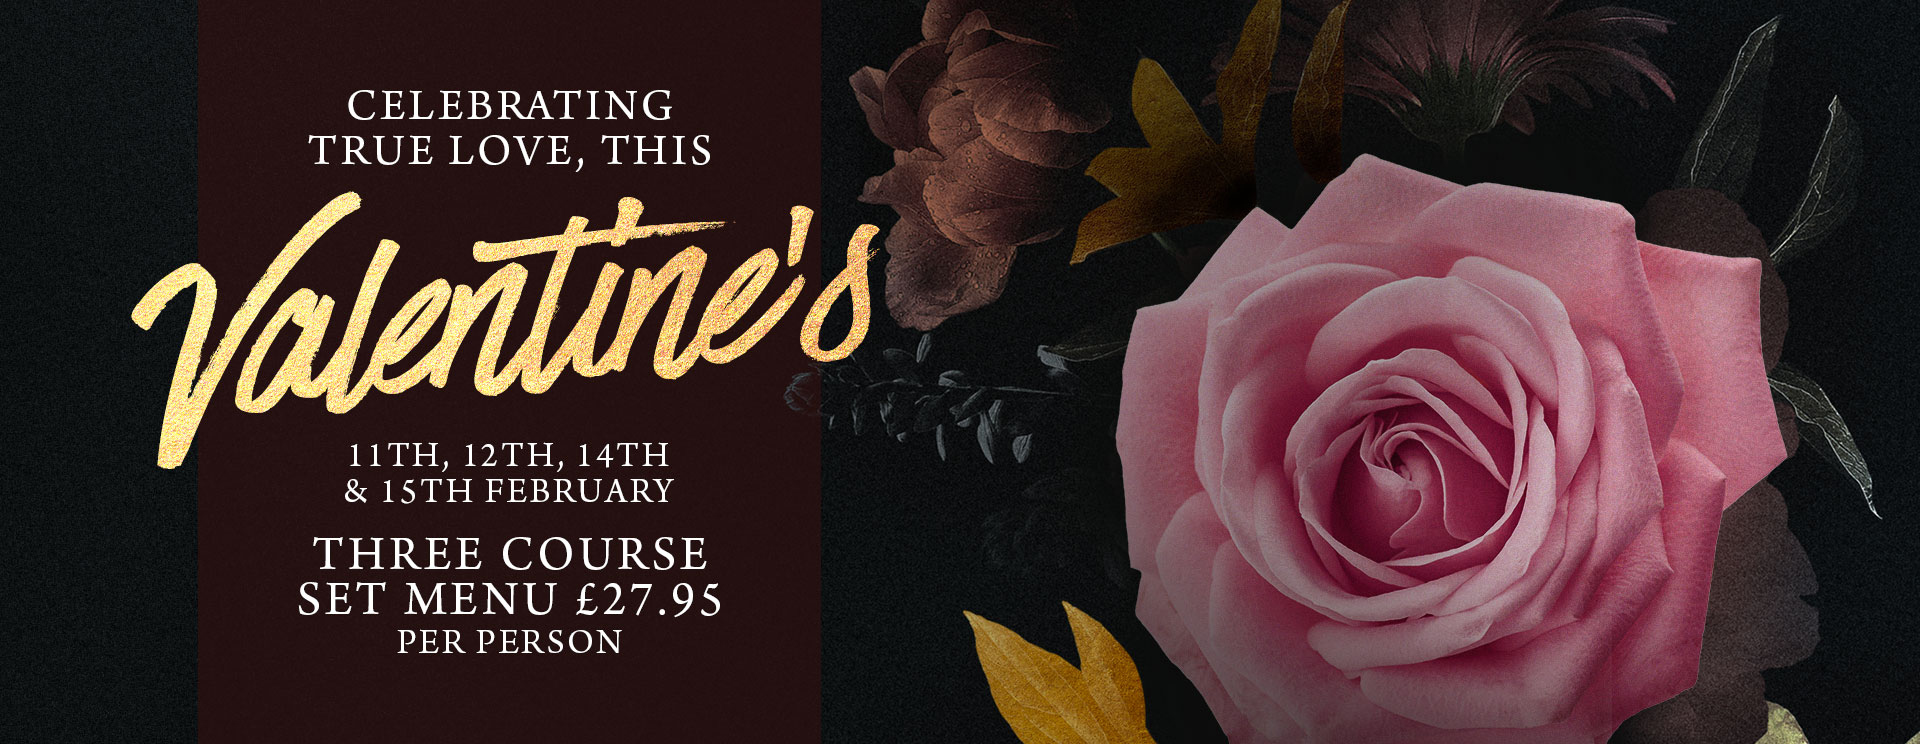 Valentines at The Horse & Groom